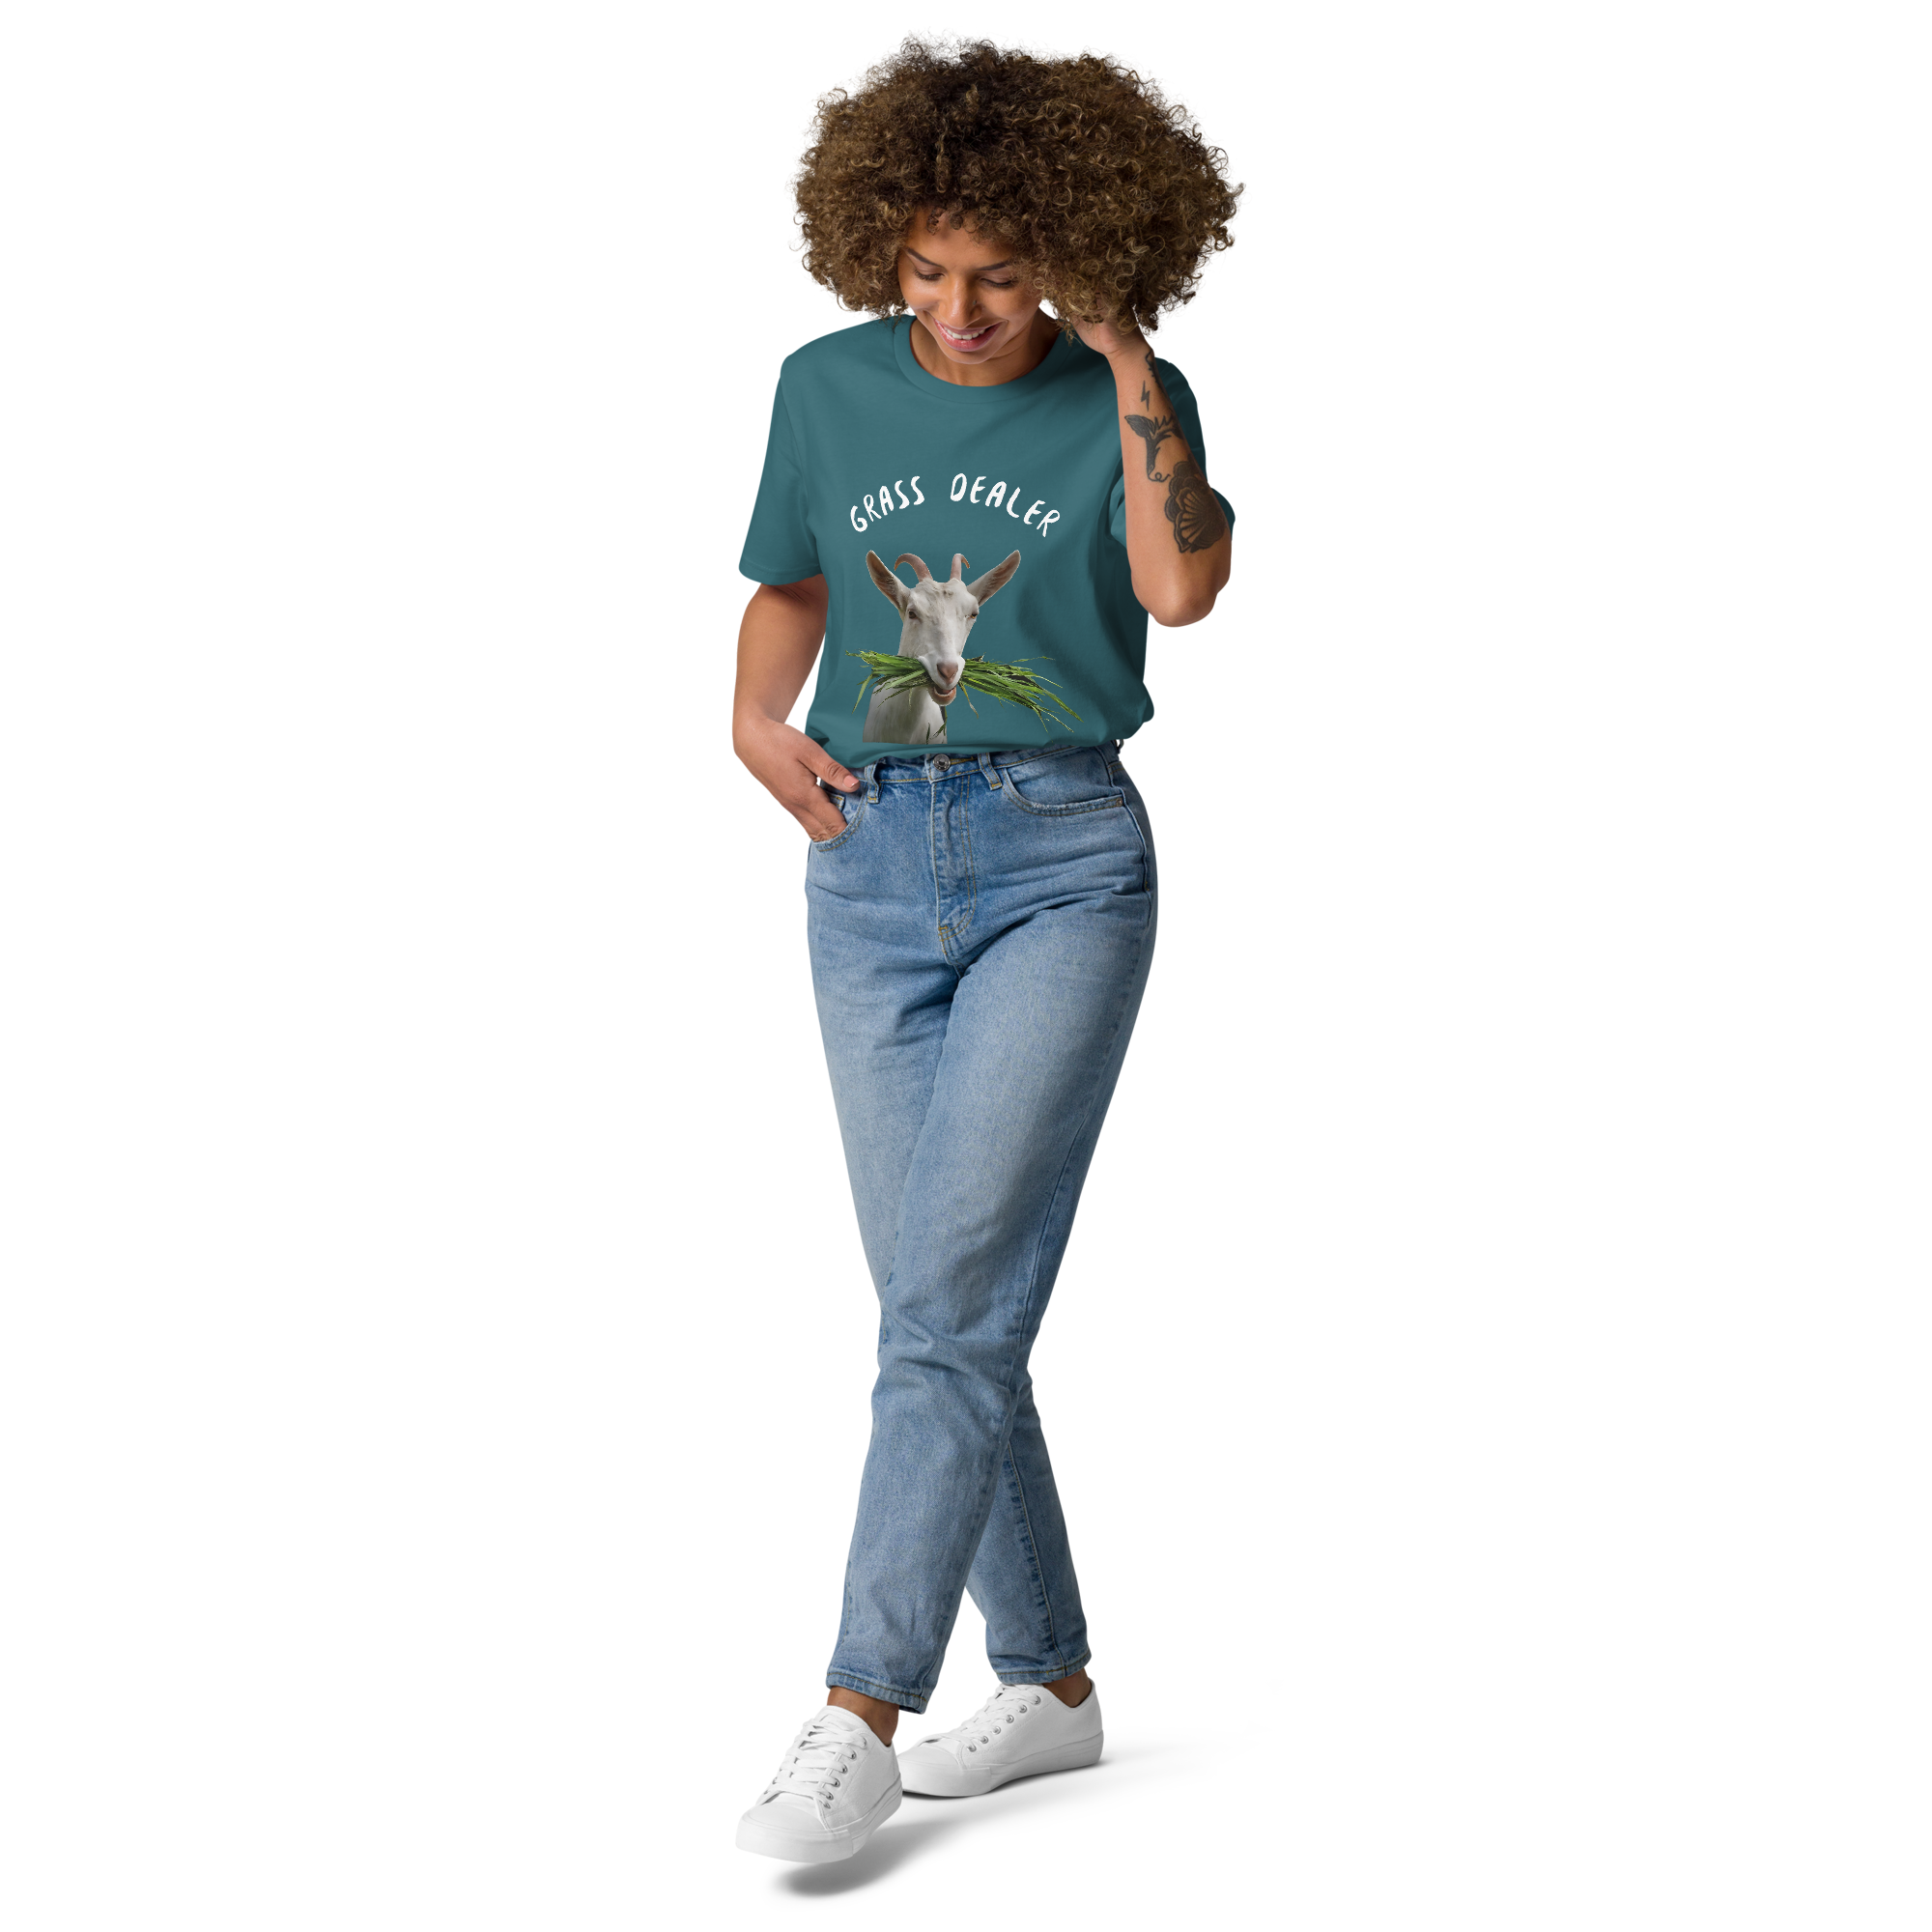 a woman with curly hair and a t-shirt